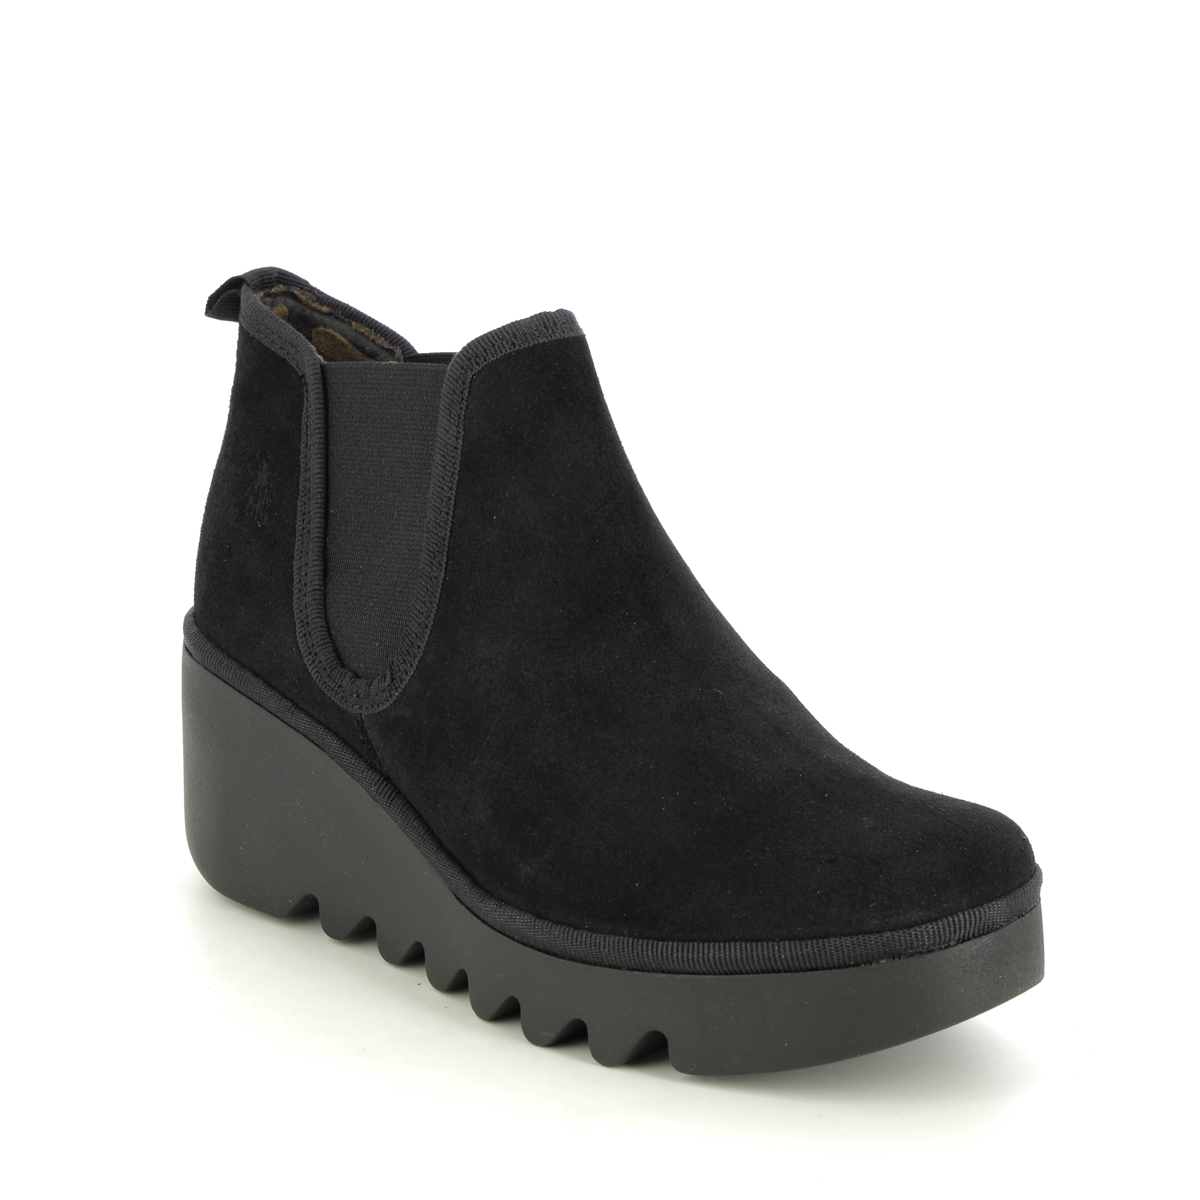 Fly London Byne  Blu Black Suede Womens Wedge Boots P501349-019 in a Plain Leather in Size 39